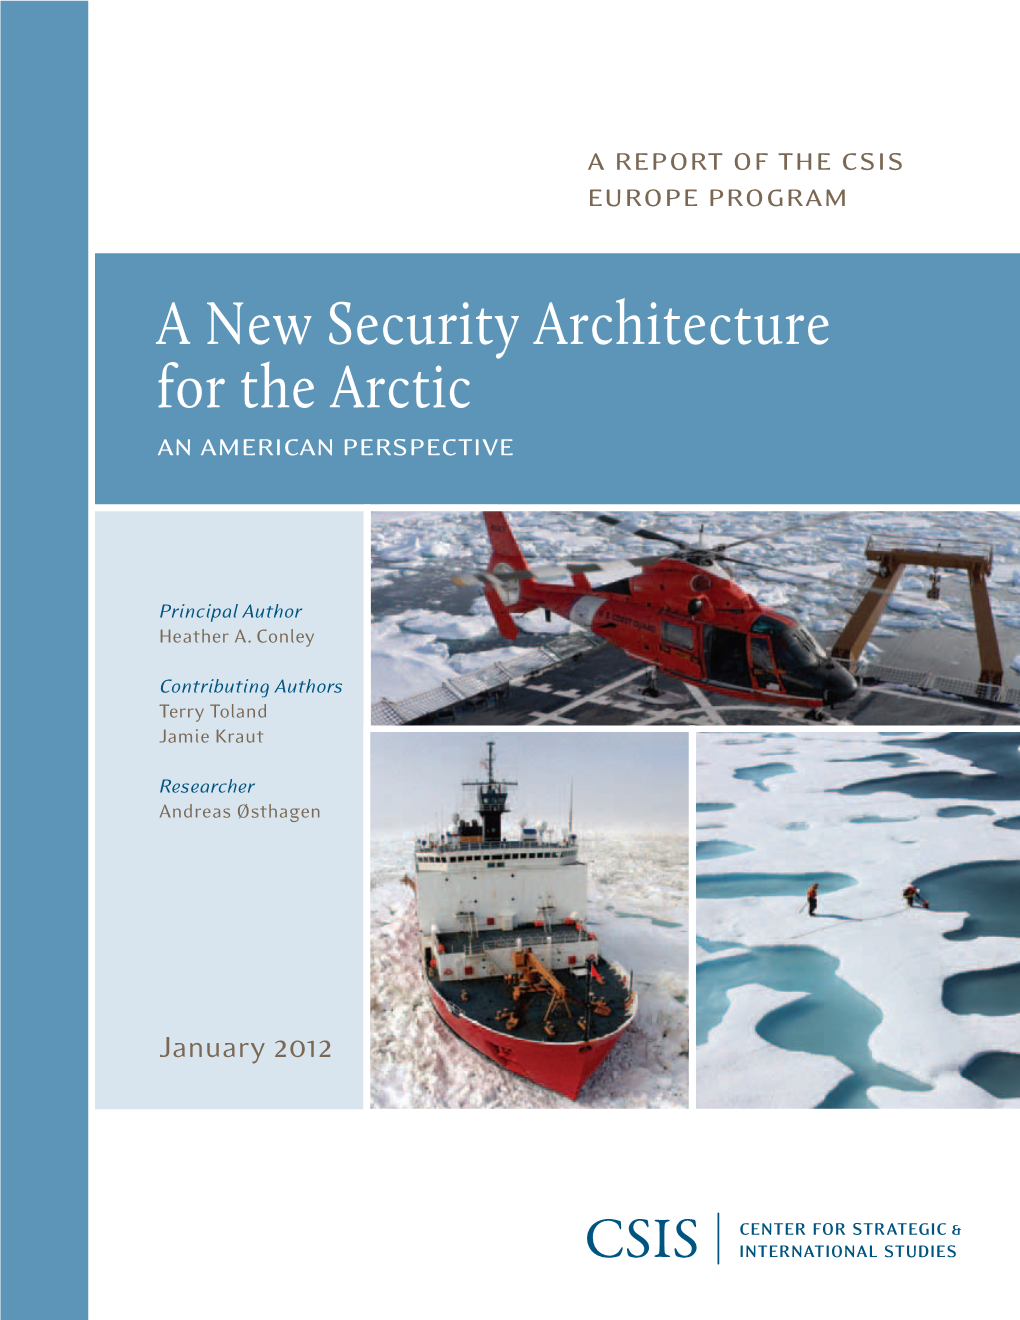 A New Security Architecture for the Arctic: an American Perspective 2 Drivers of Change